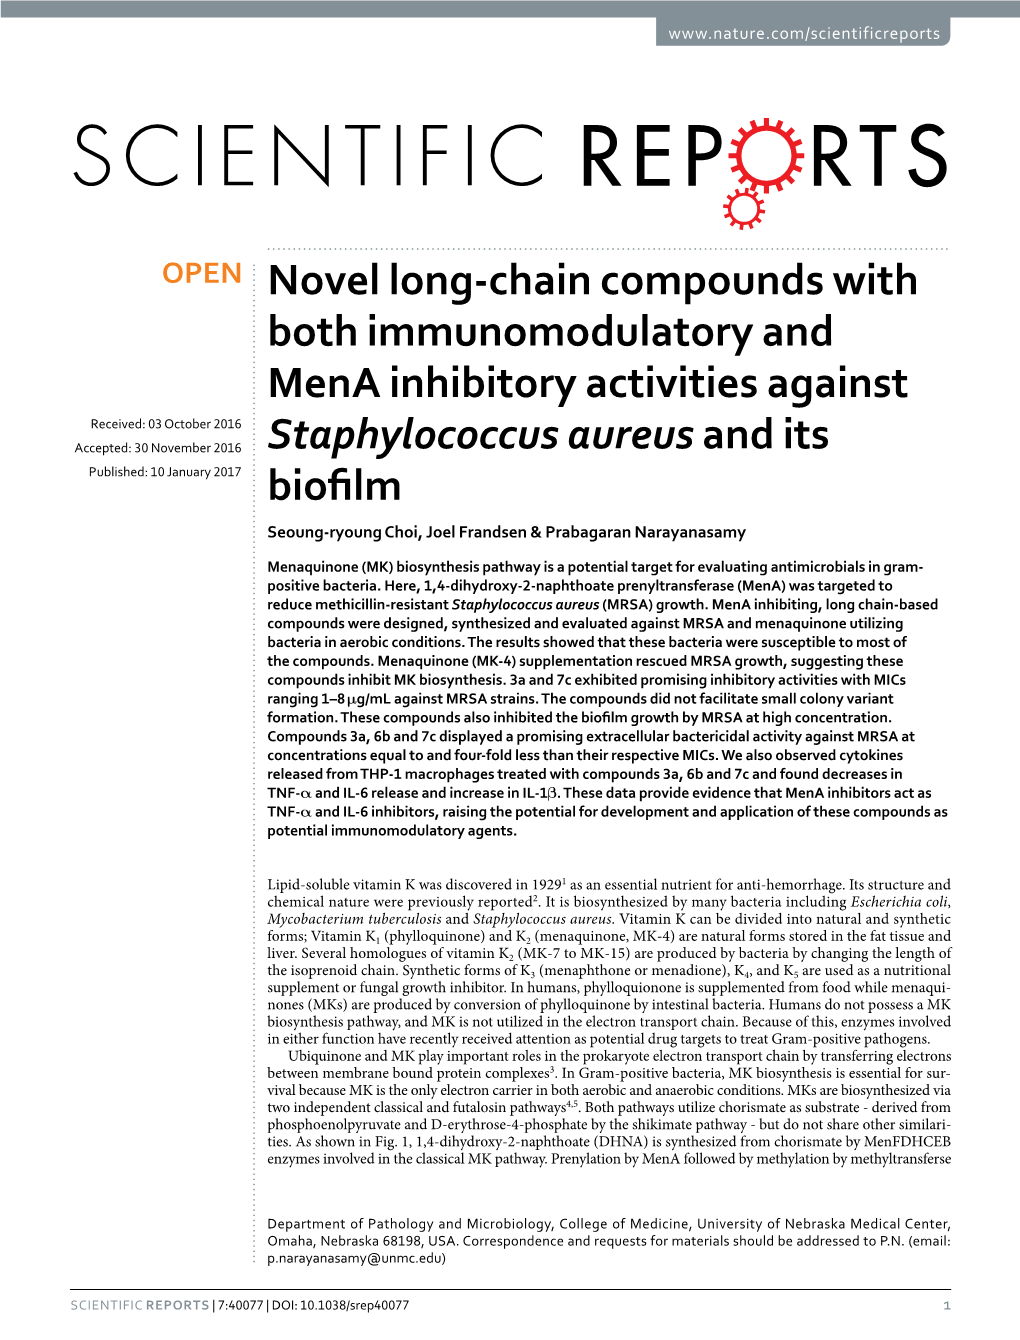 Novel Long-Chain Compounds with Both Immunomodulatory and Mena Inhibitory Activities Against Staphylococcus Aureus and Its Biofilm